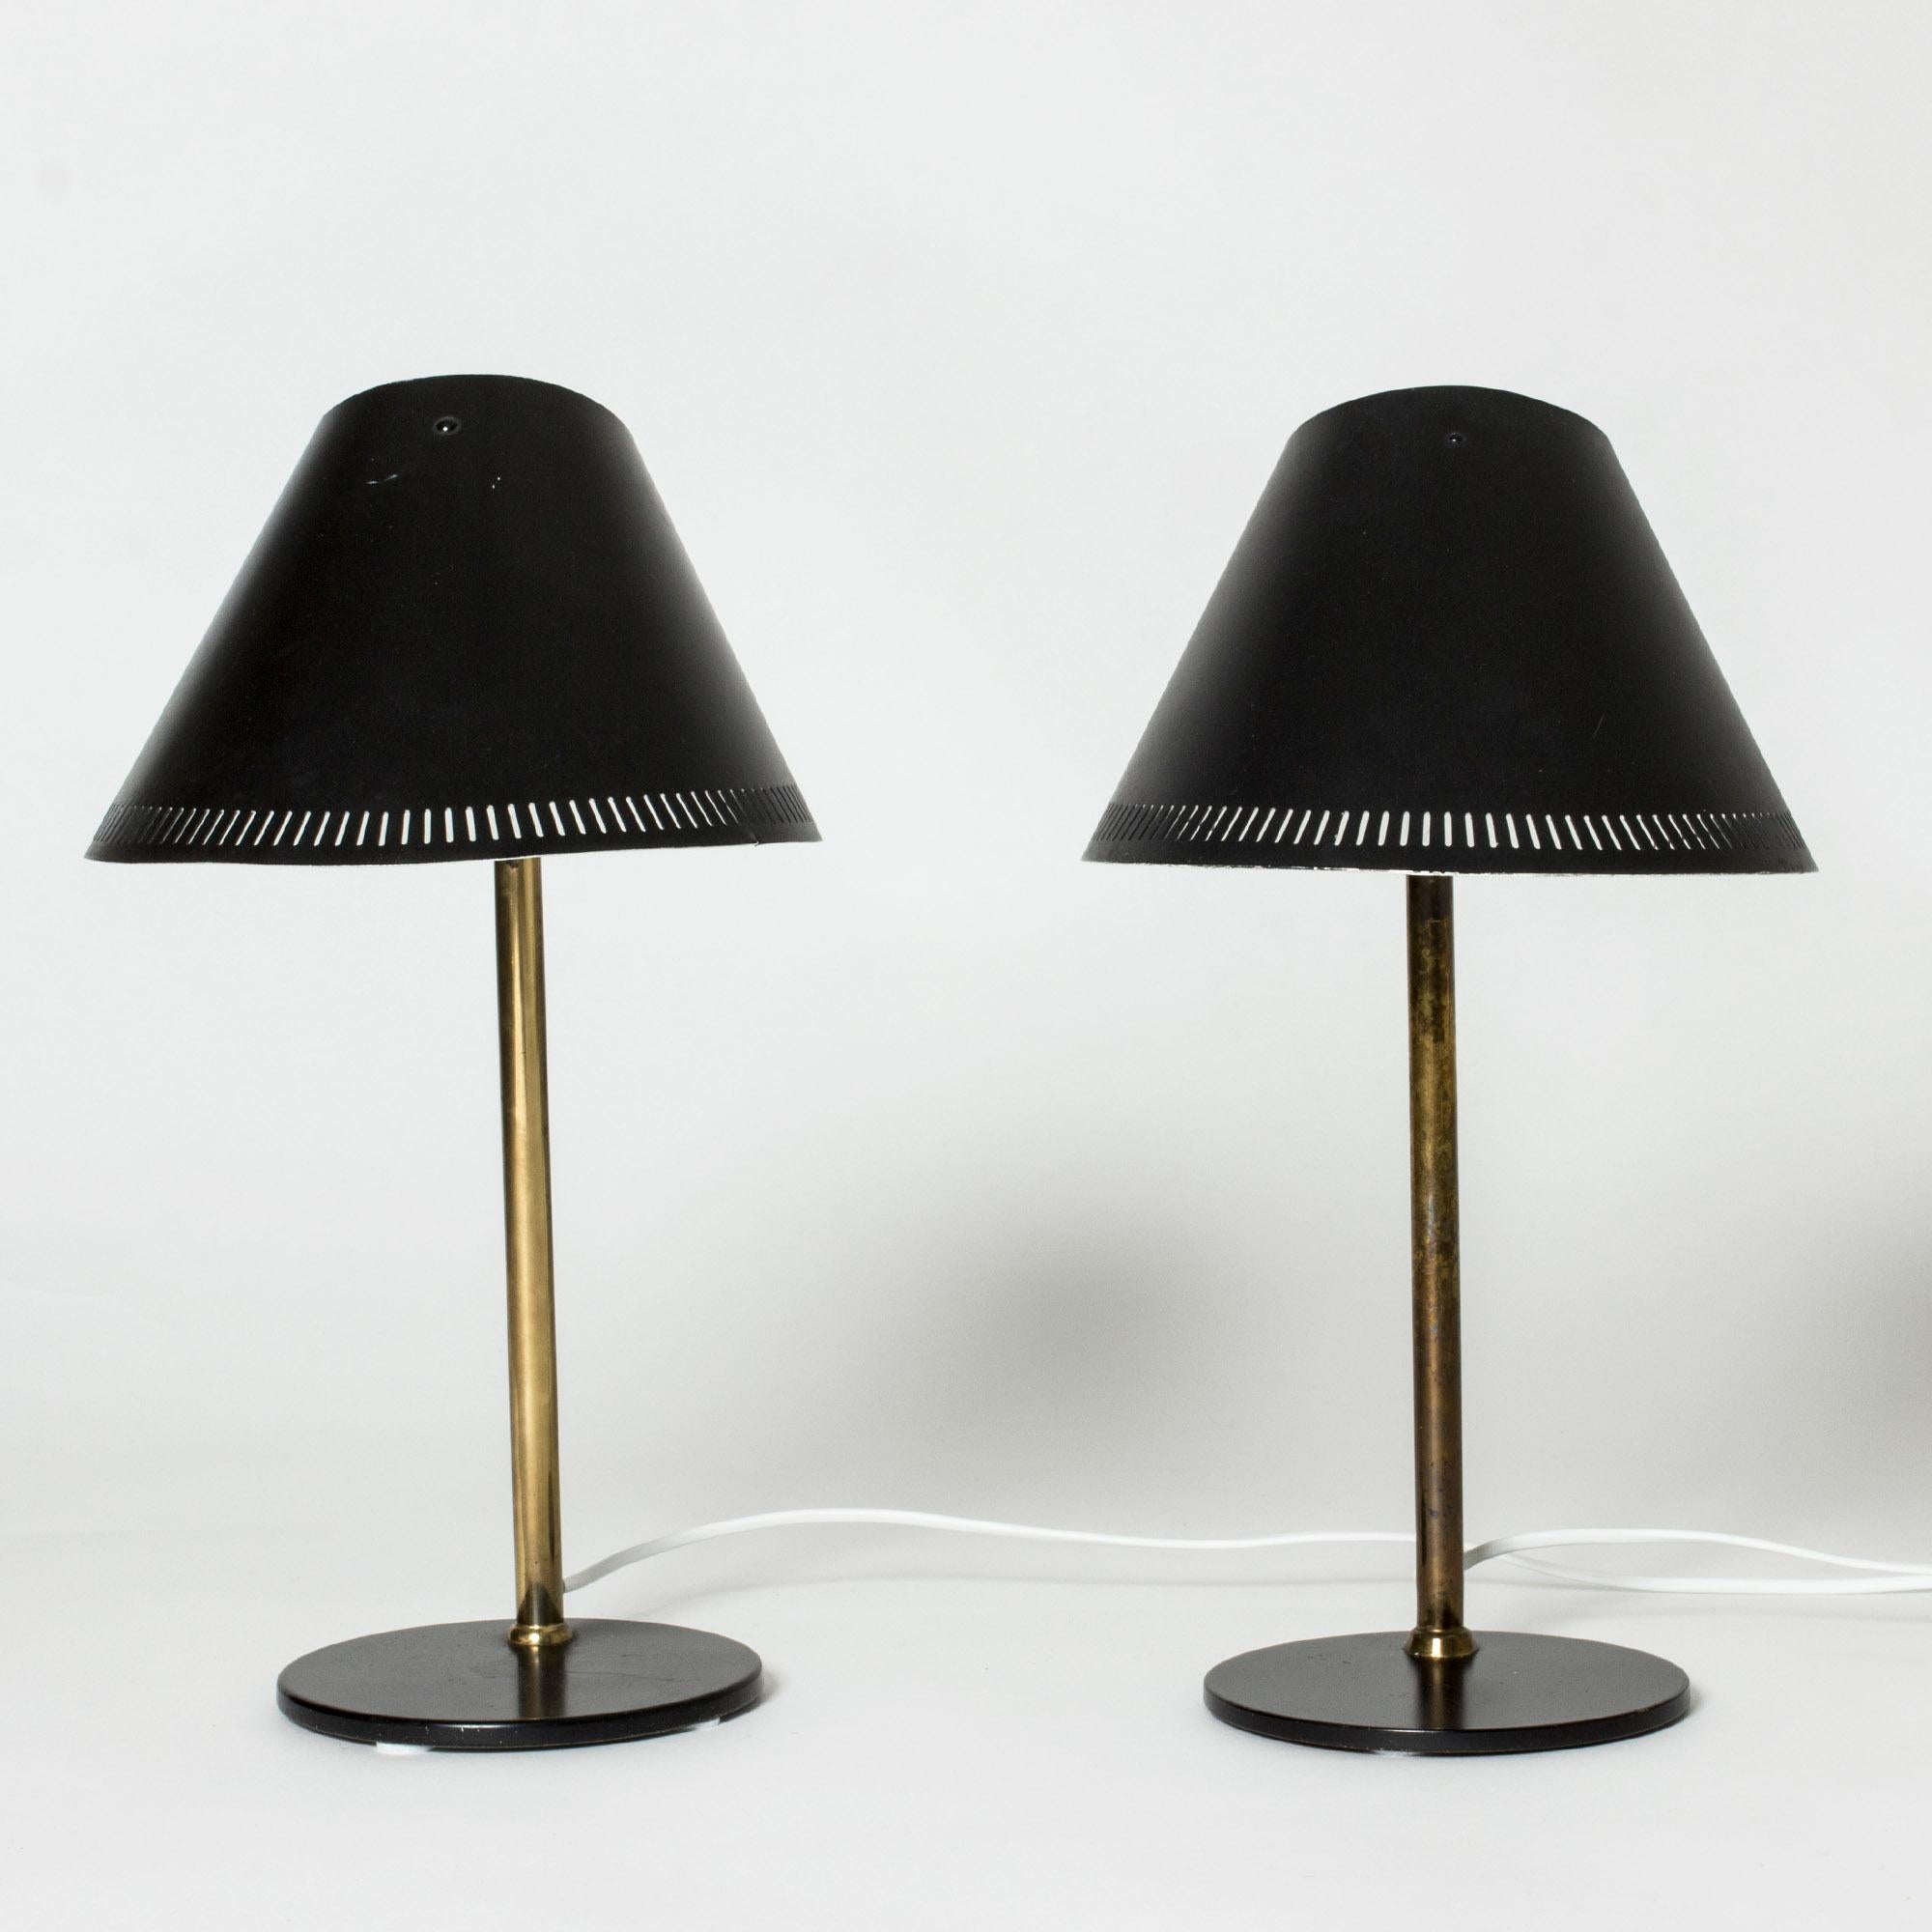 Pair of brass table lamps, model 9227, by Paavo Tynell. Elegant, distinct forms with black lacquered bases and shades. Edges perforated in a graphic pattern.